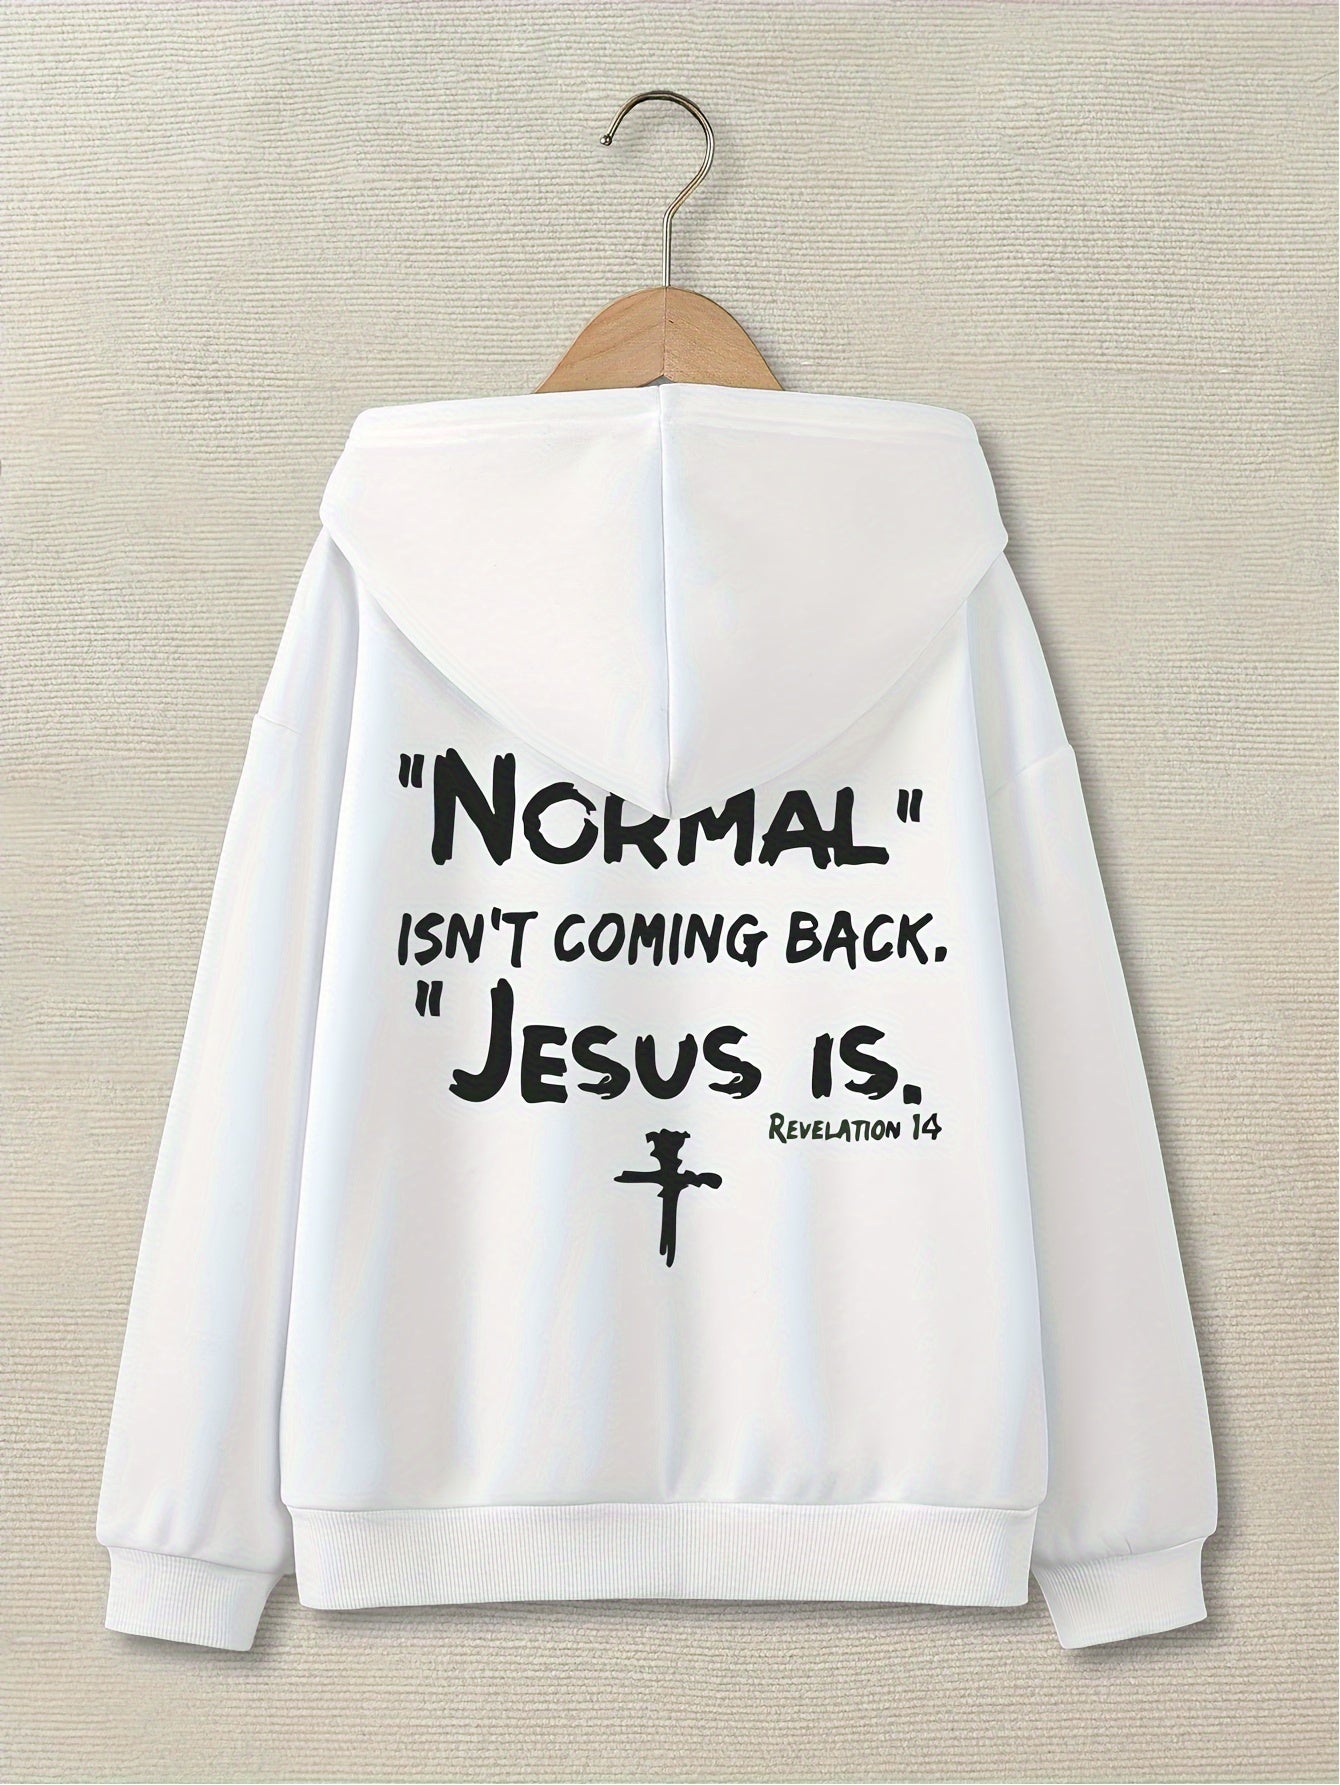 Normal Isn't Coming Back Jesus Is Youth Christian Pullover Hooded Sweatshirt claimedbygoddesigns